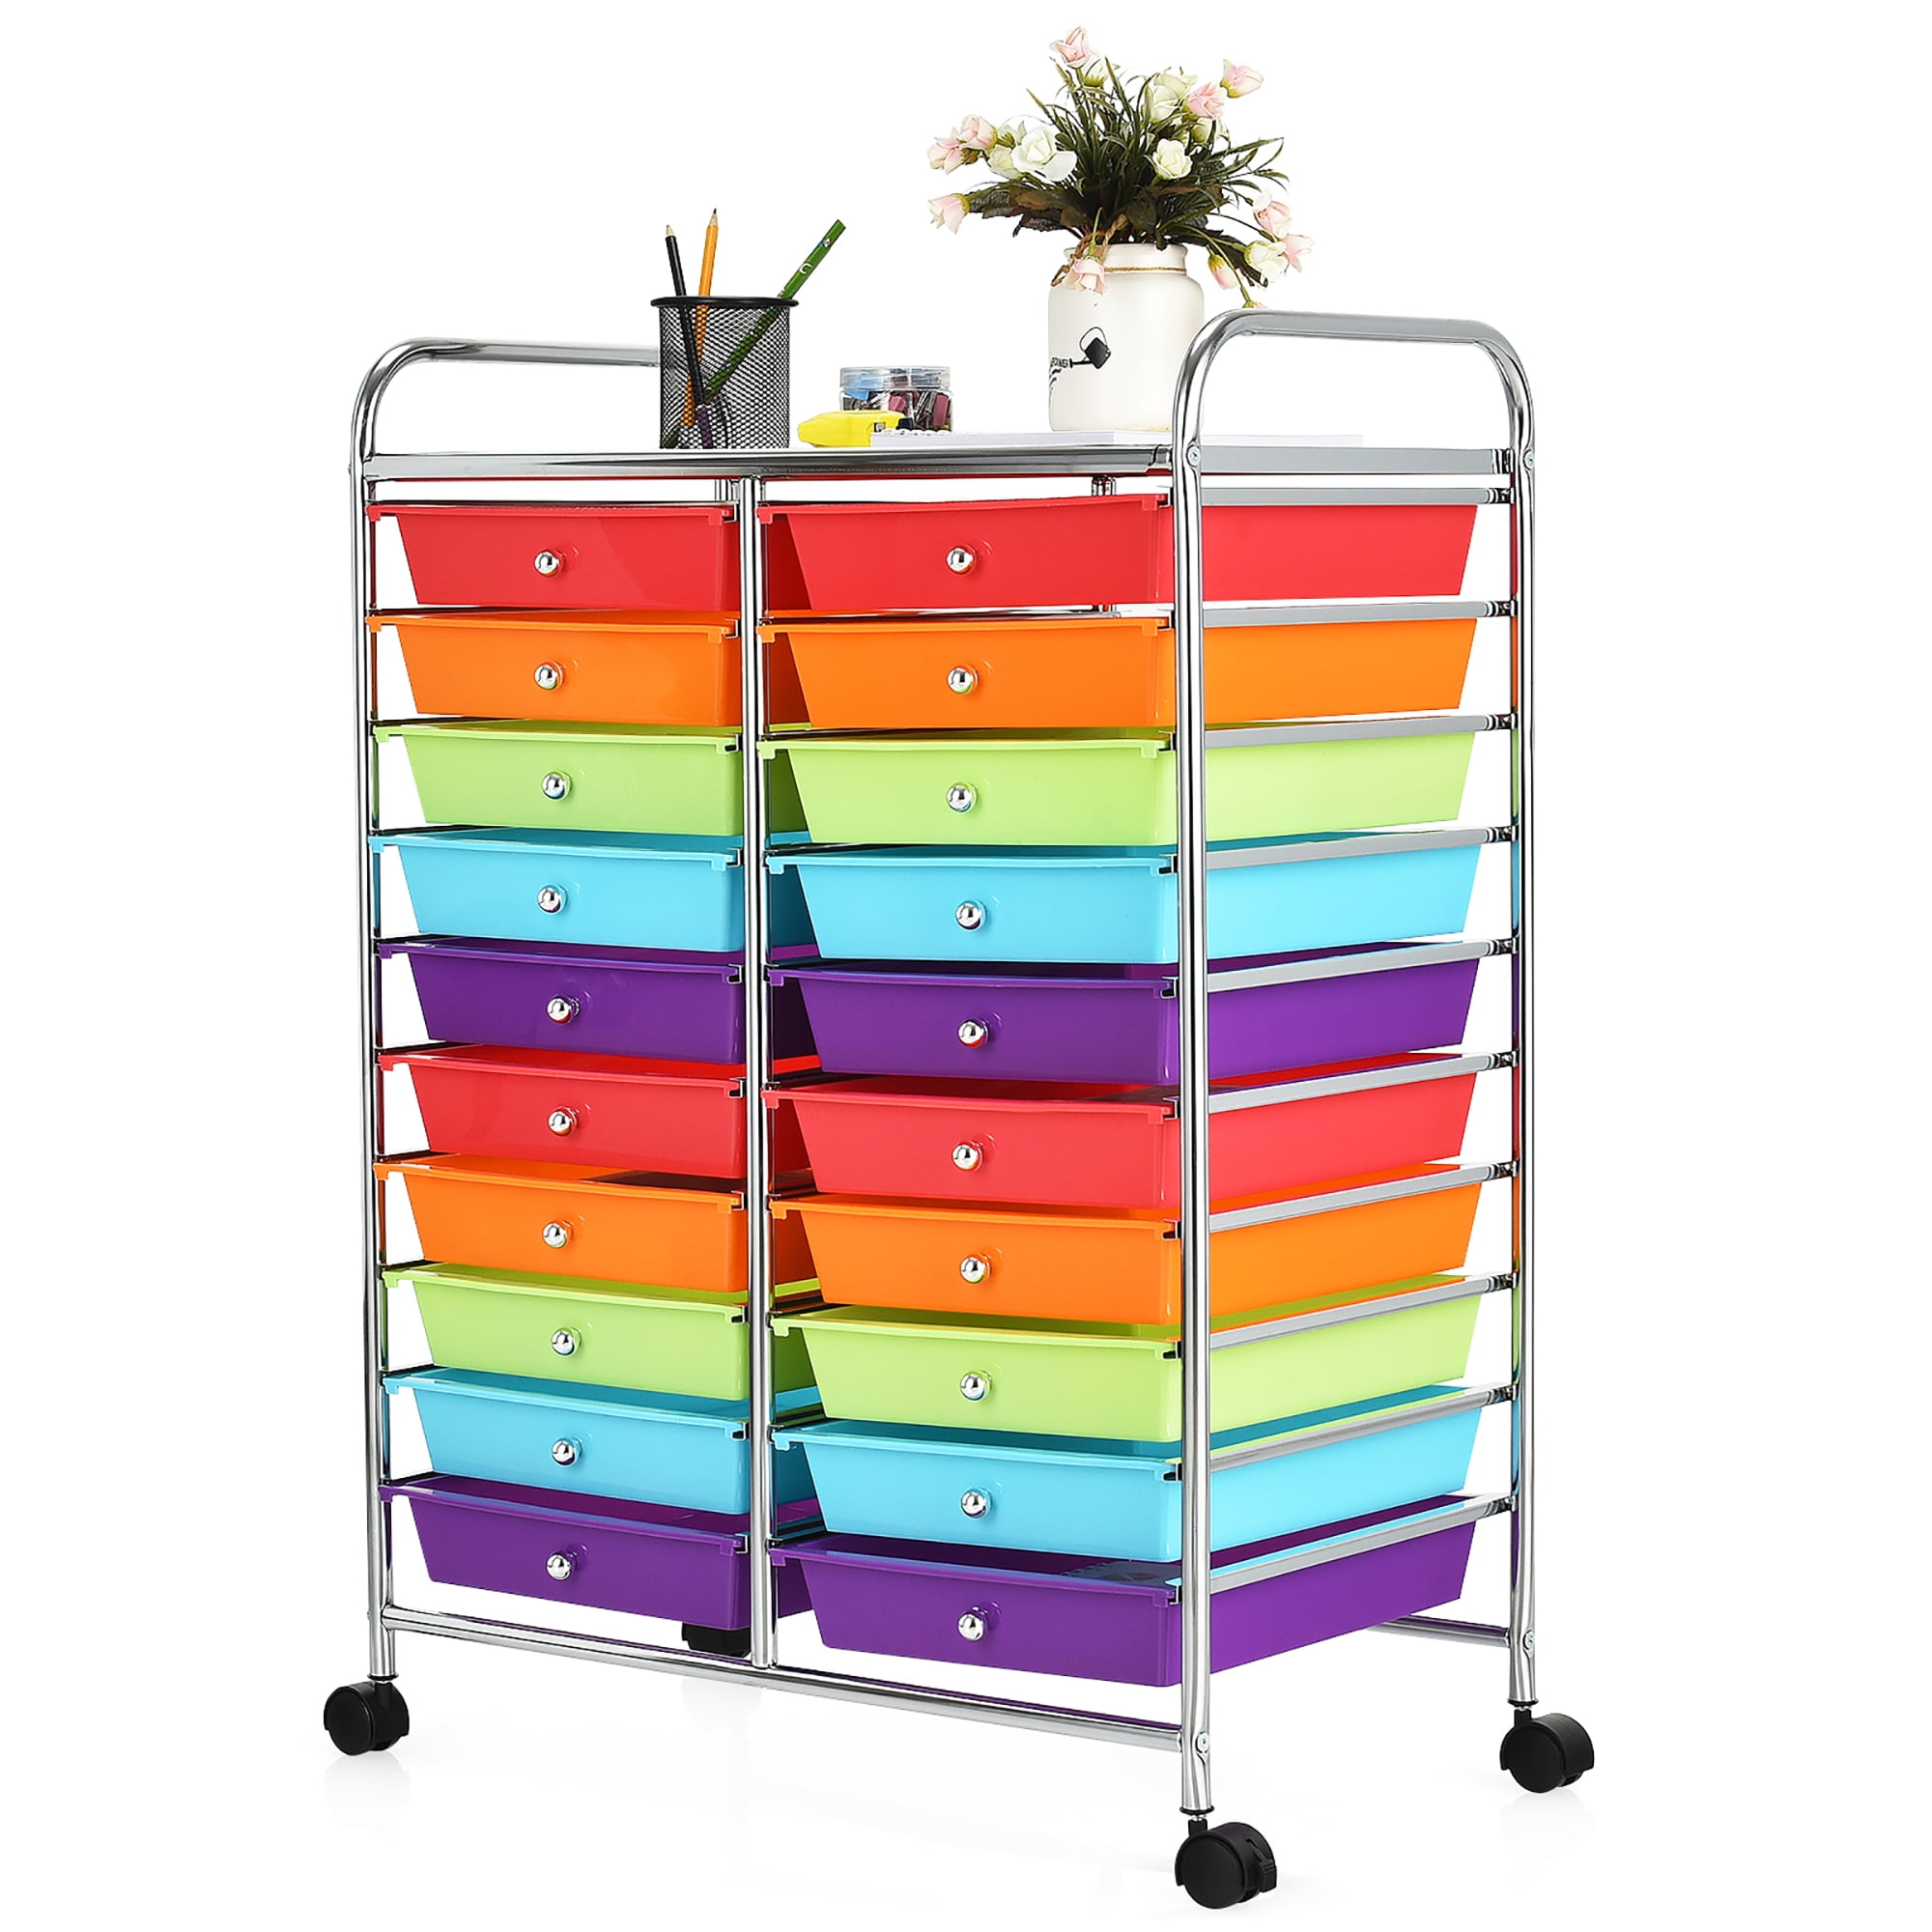 SPSUPE 20-Drawer Multipurpose Rolling Storage Cart Color Utility Cart Ideal for Home Office School Tools Scrapbook Paper Organizer 